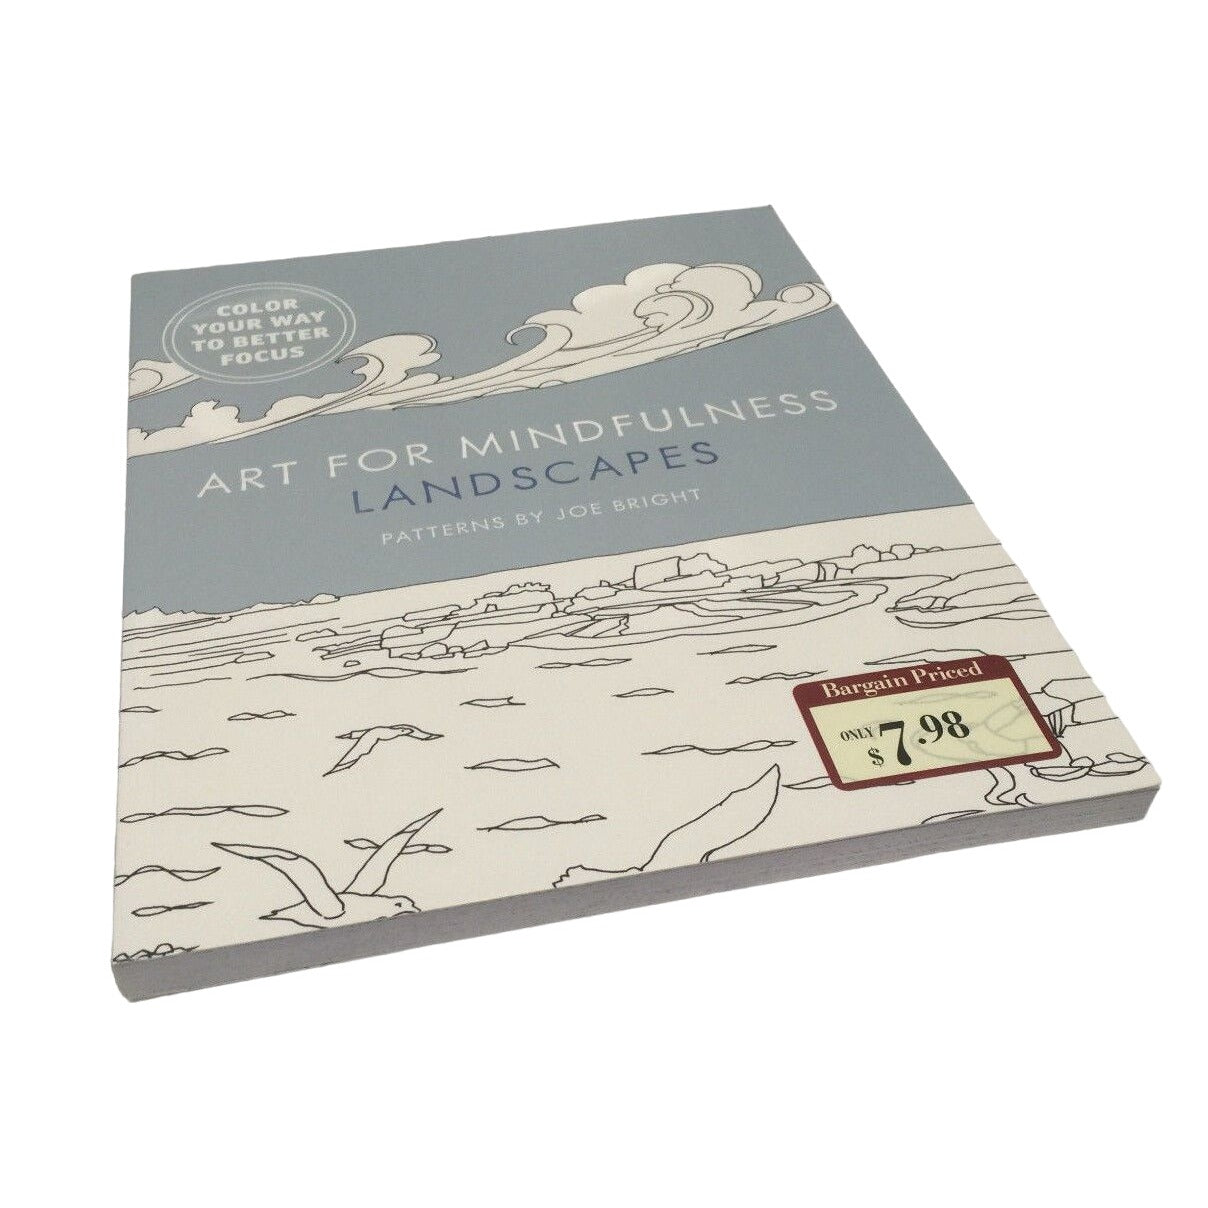 ART FOR MINDFULNESS LANDSCAPES Patterns by Joe Bright Coloring Book